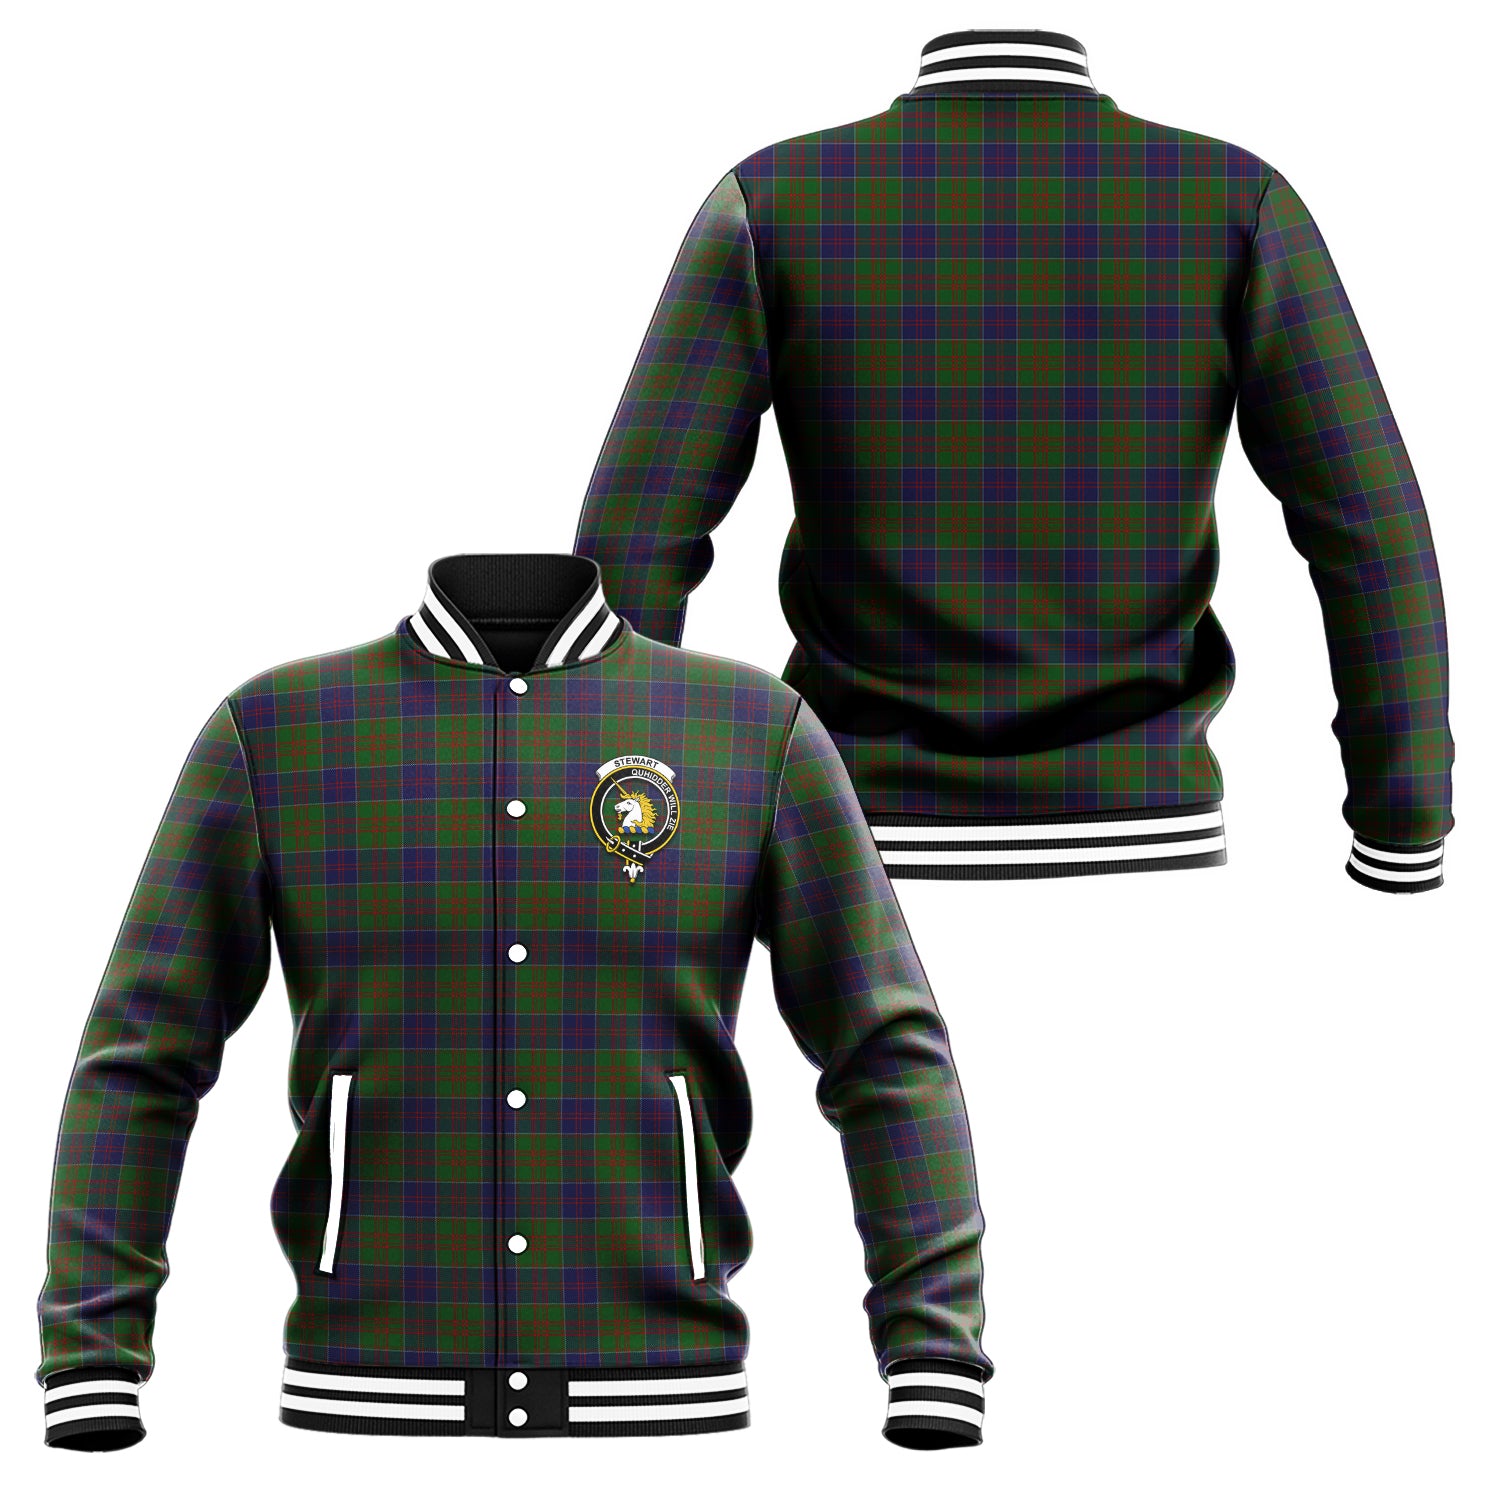 stewart-of-appin-hunting-tartan-baseball-jacket-with-family-crest